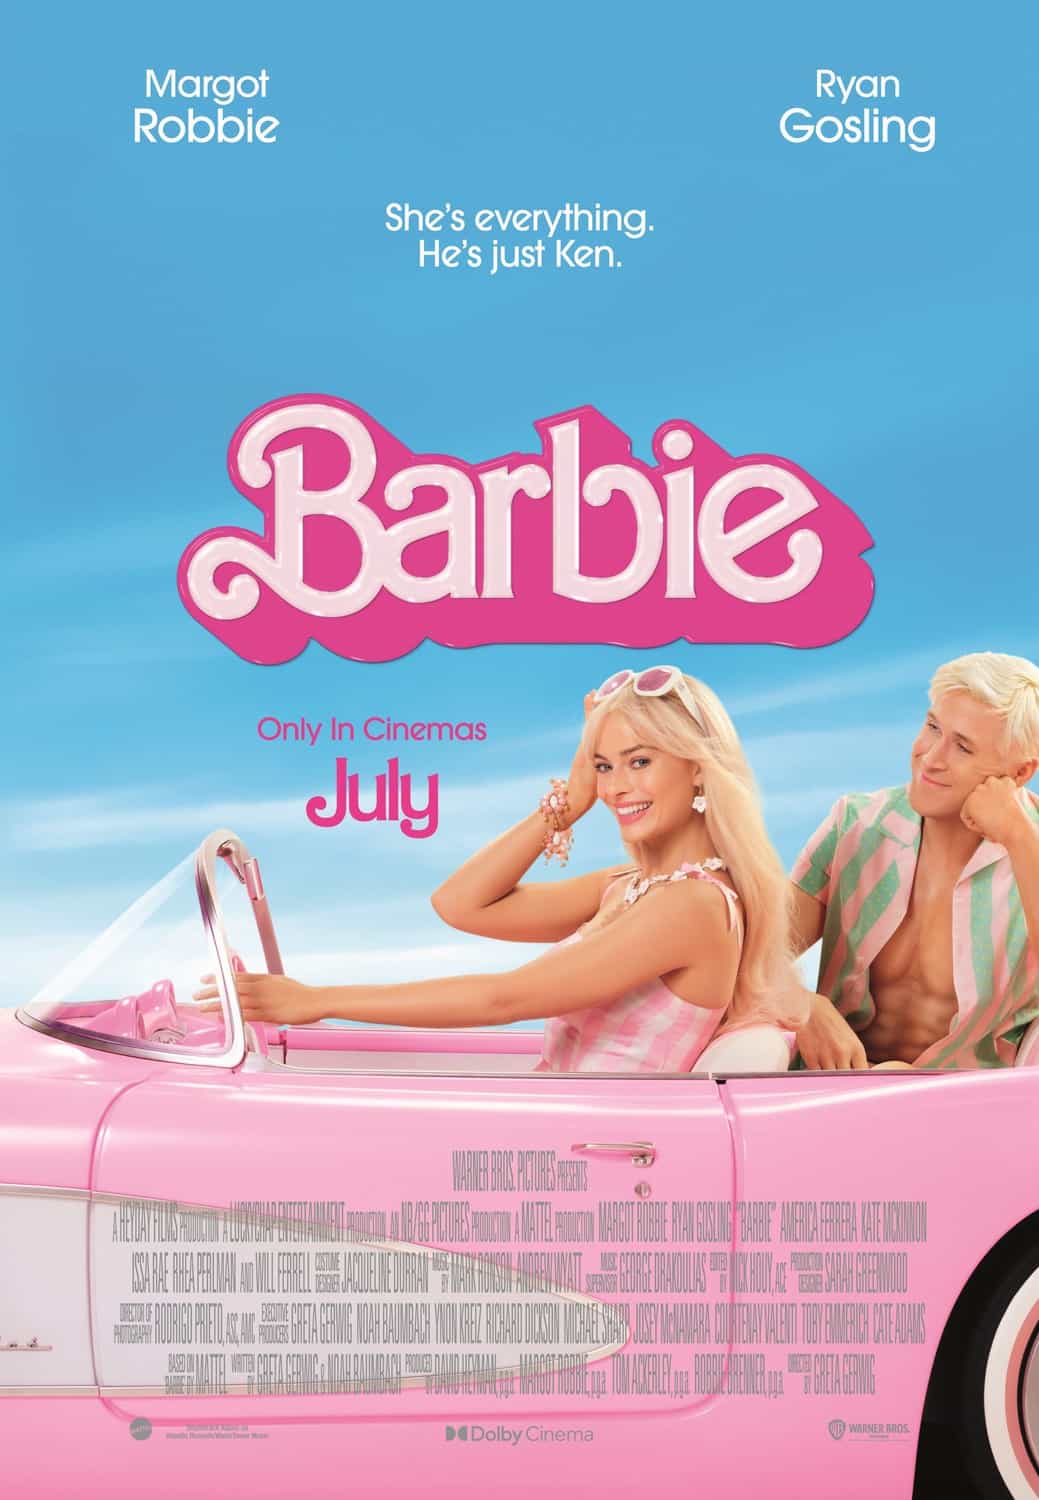 The first trailer and poster released for Barbie starring Margot Robbie - movie UK release date 21st July 2023 #barbie